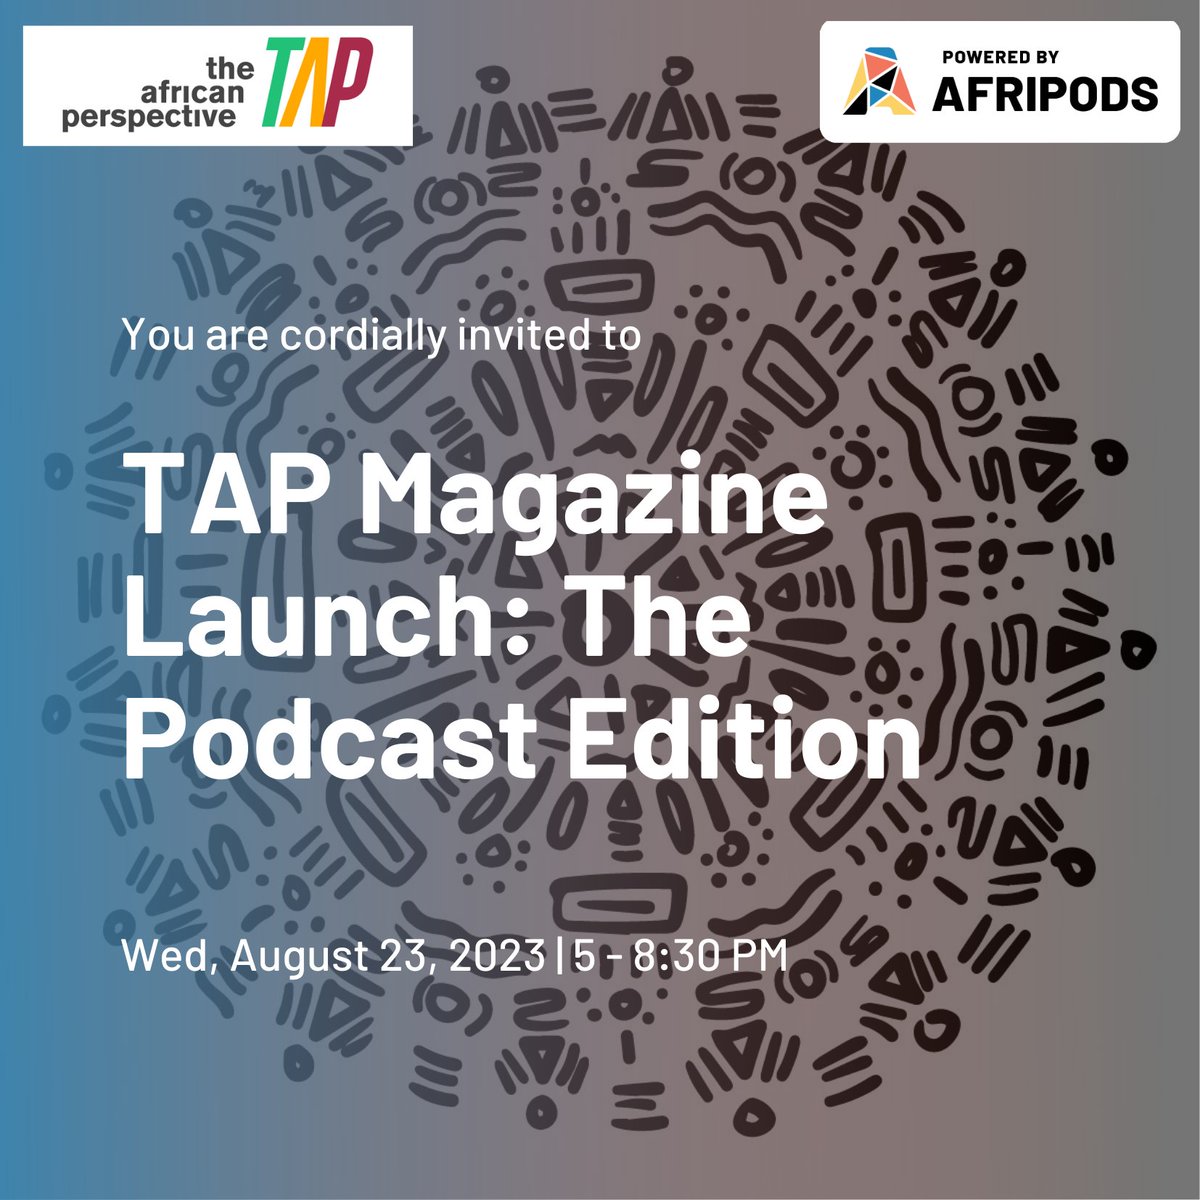 Calling Kenyan podcasters!

We have an event tomorrow to celebrate the launch of the 18th edition of @TAP_Magazine : The Podcast Edition. We would love to have you join us.

Must show ticket on entry! 🙂

Space is limited. RSVP here bit.ly/3KQdxax

#TAPTakeover